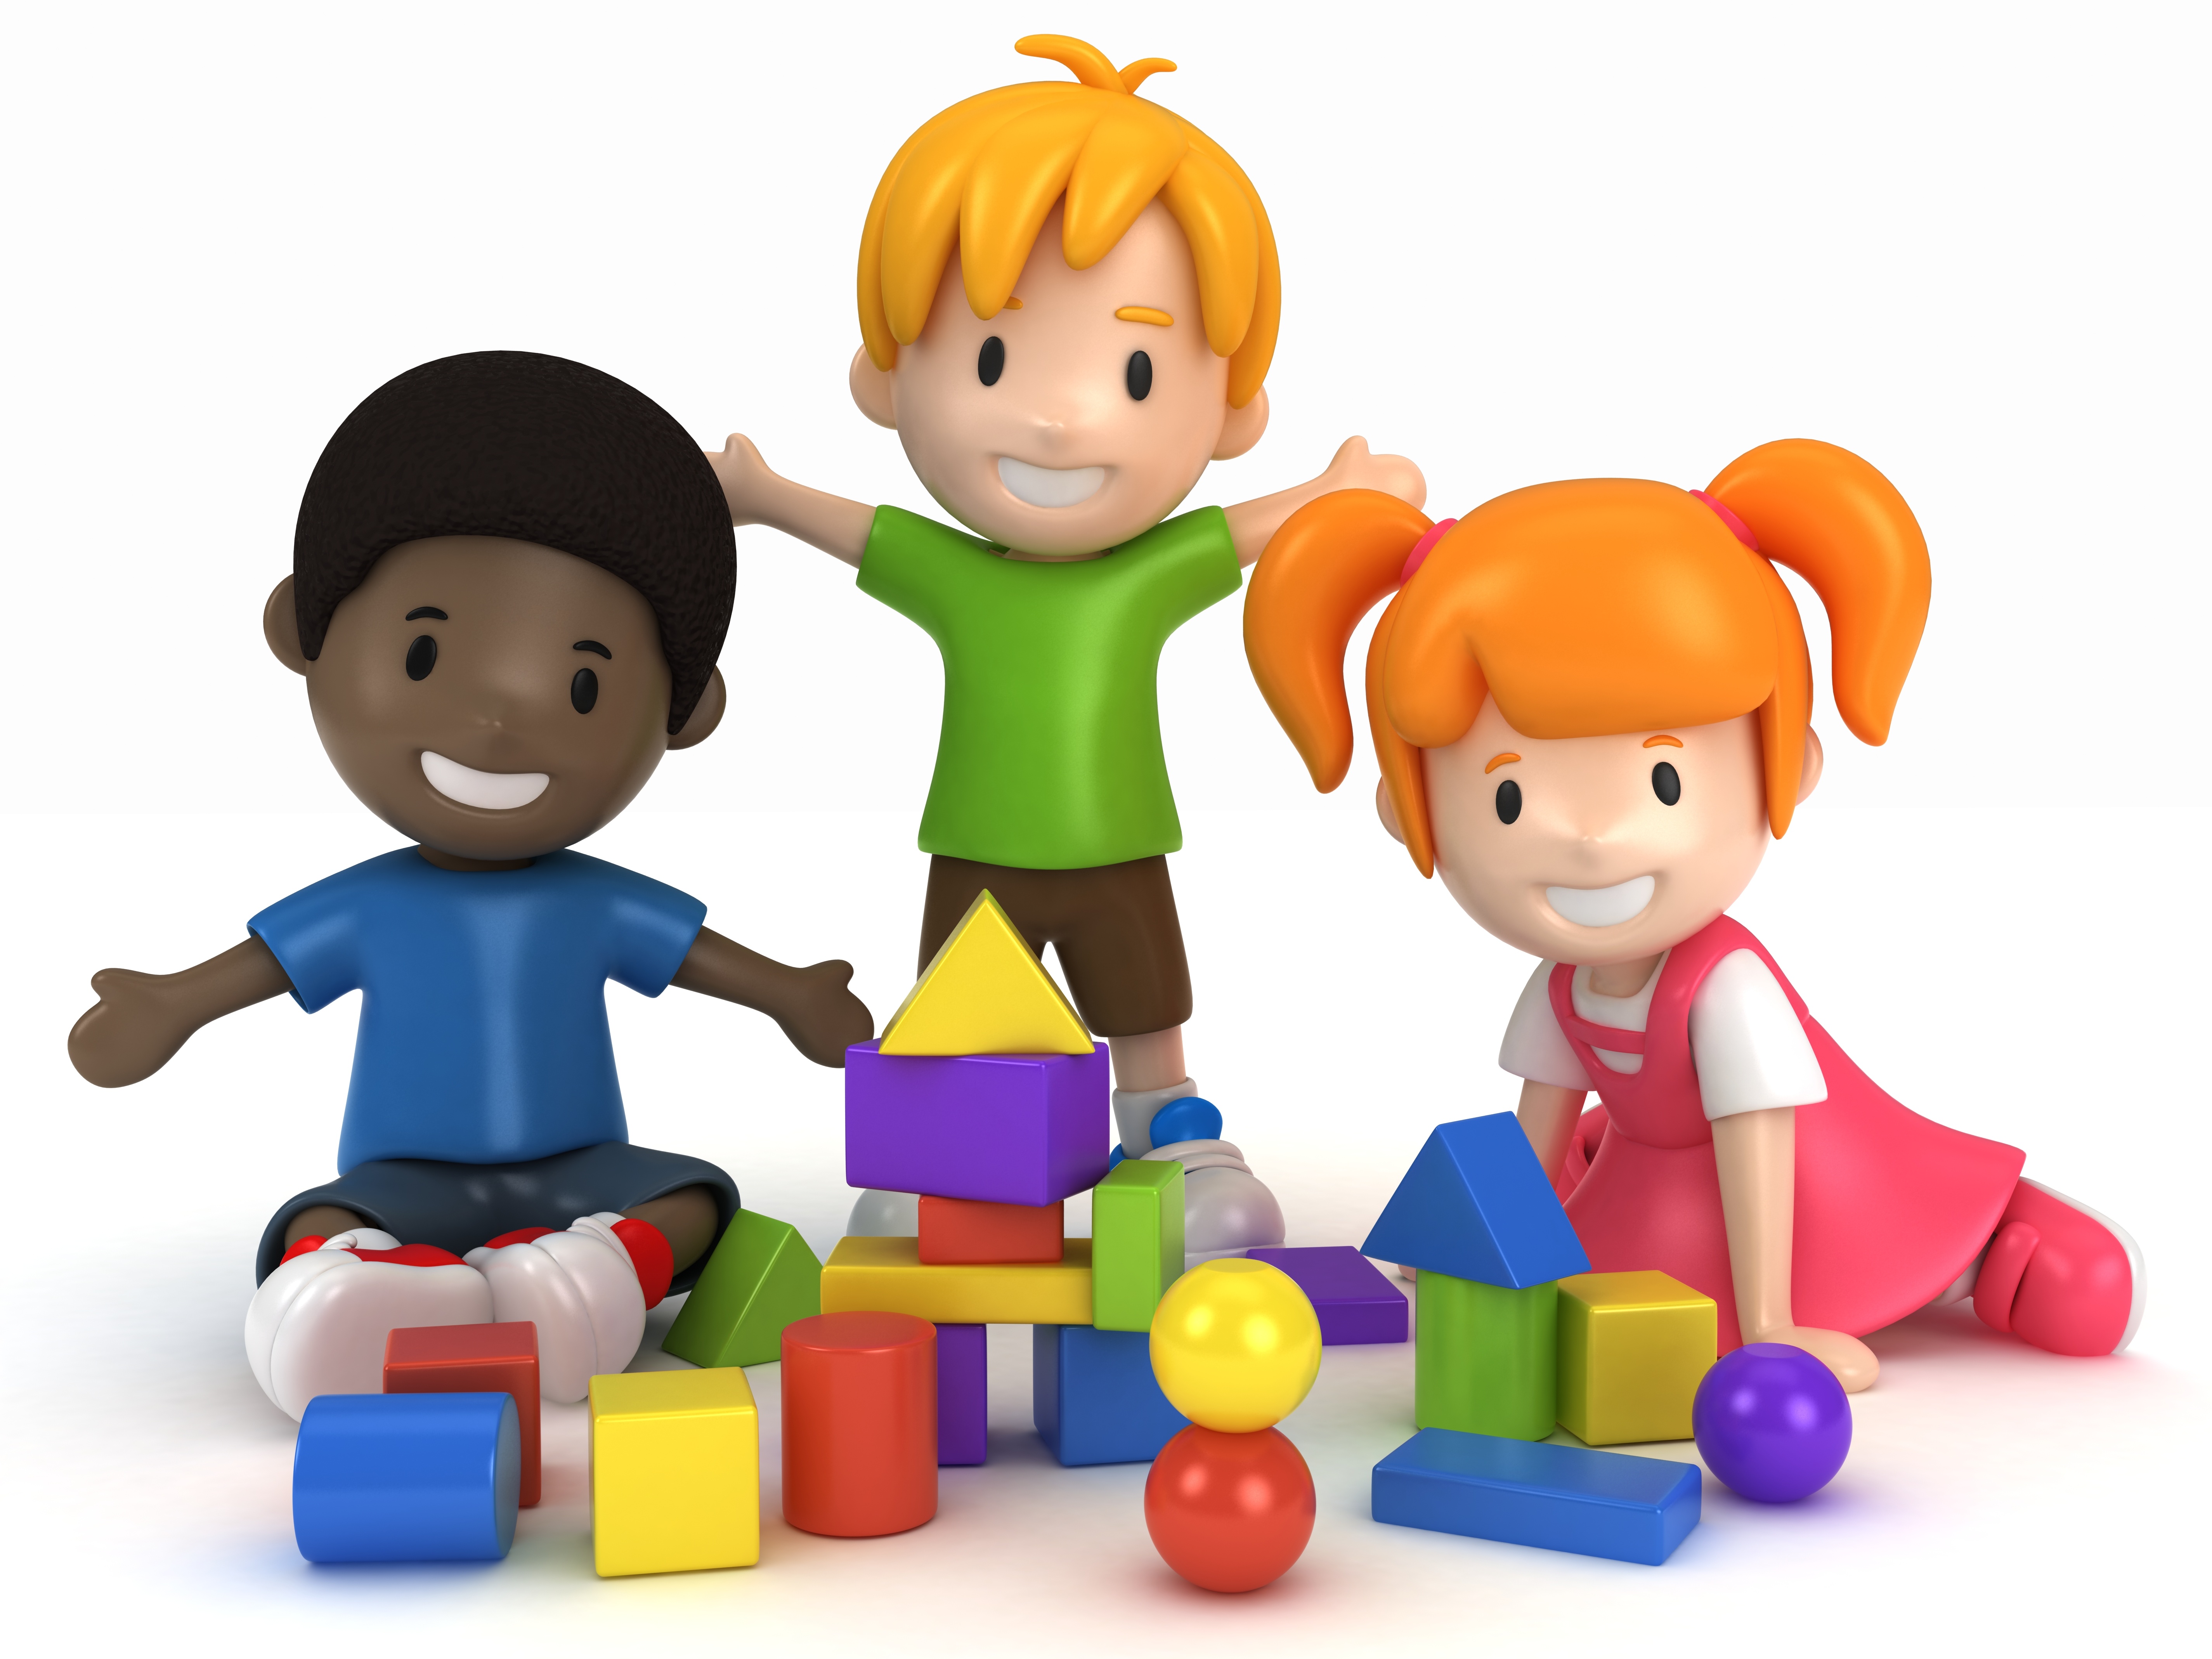 3D Render of kids Playing Building Blocks | ABQ Childcare Centers